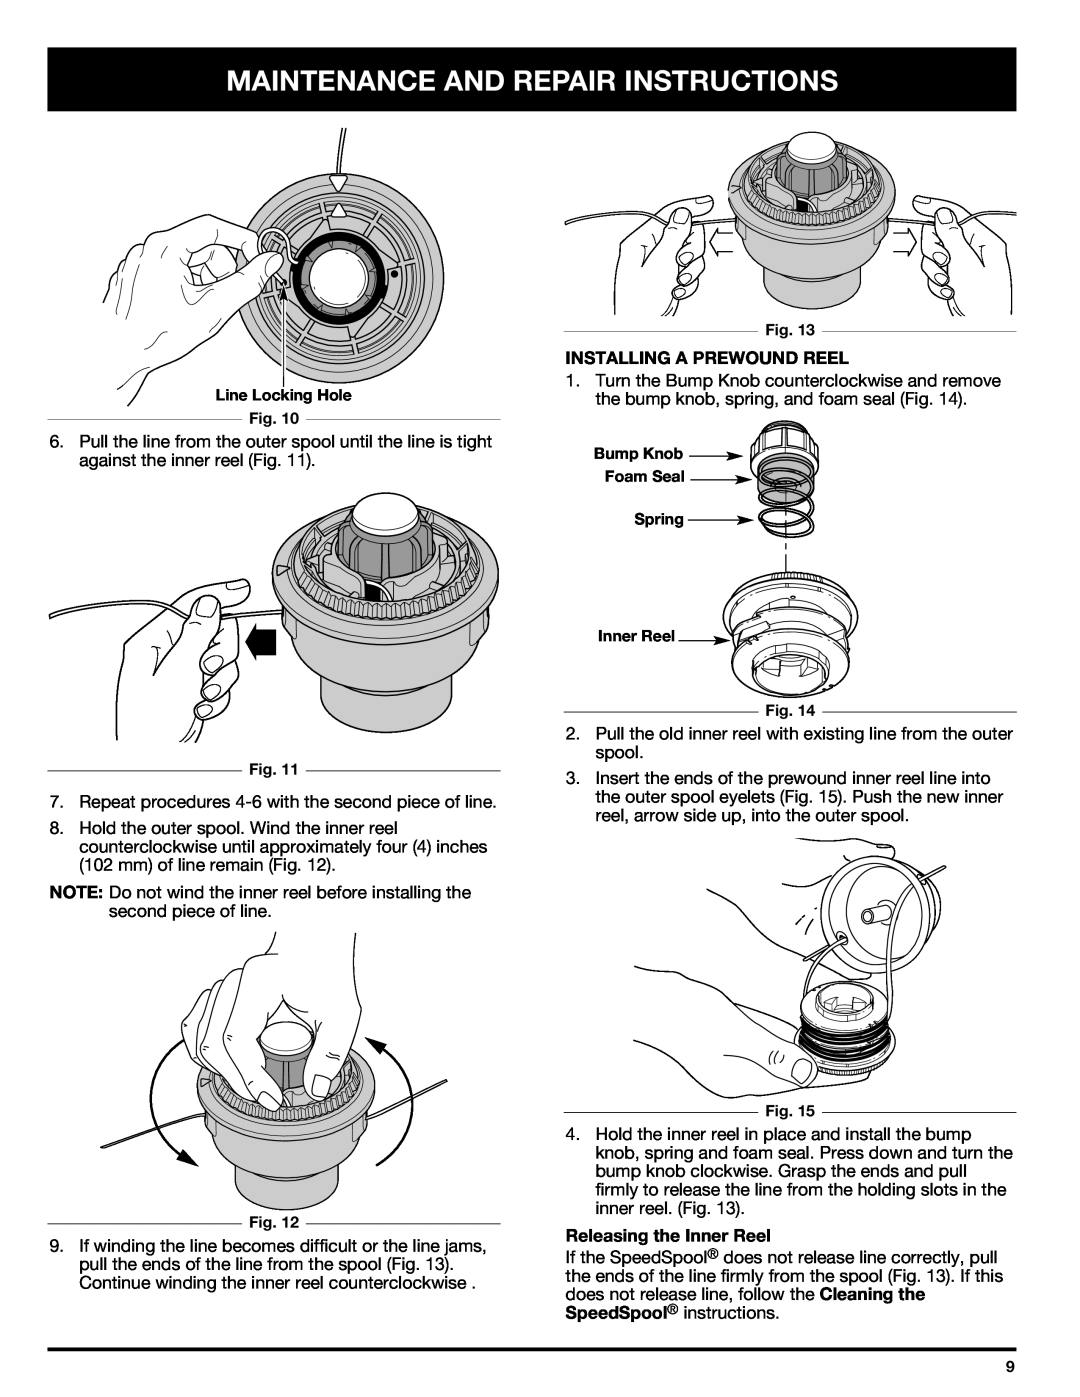 Ryobi SS725r manual Maintenance And Repair Instructions, Installing A Prewound Reel, Releasing the Inner Reel 